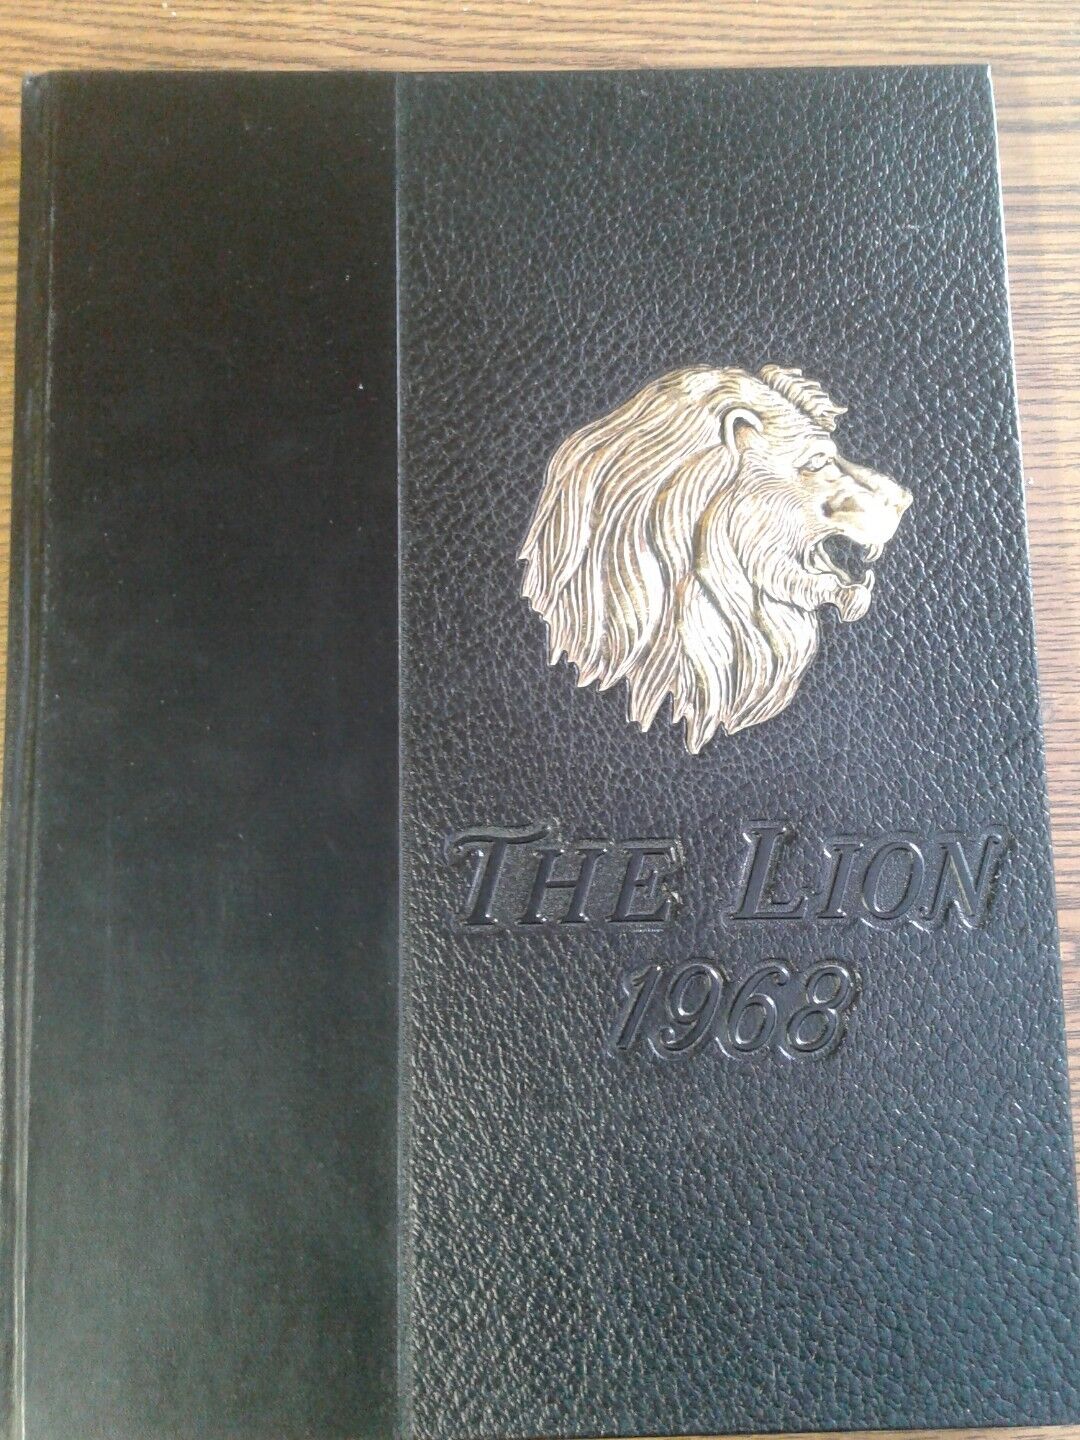 1968 Red Lion Area Senior High School Red Lion  Pa  Yearbook 